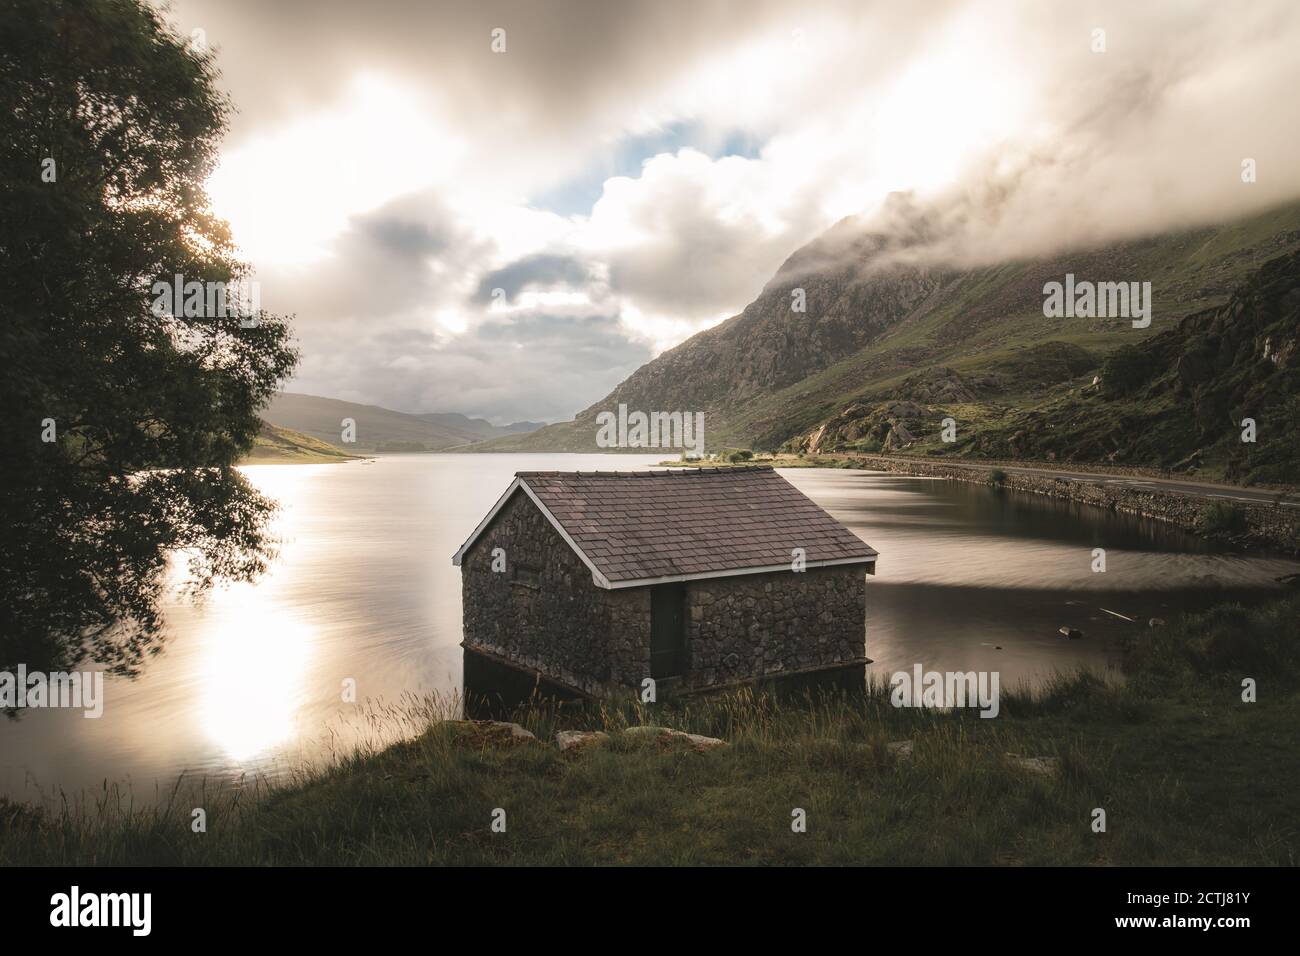 Llyn Ogwen boathouse situated in the mountains of Snowdonia, North Wales. Without doubt one of the most beautiful locations found in the Ogwen Valley Stock Photo